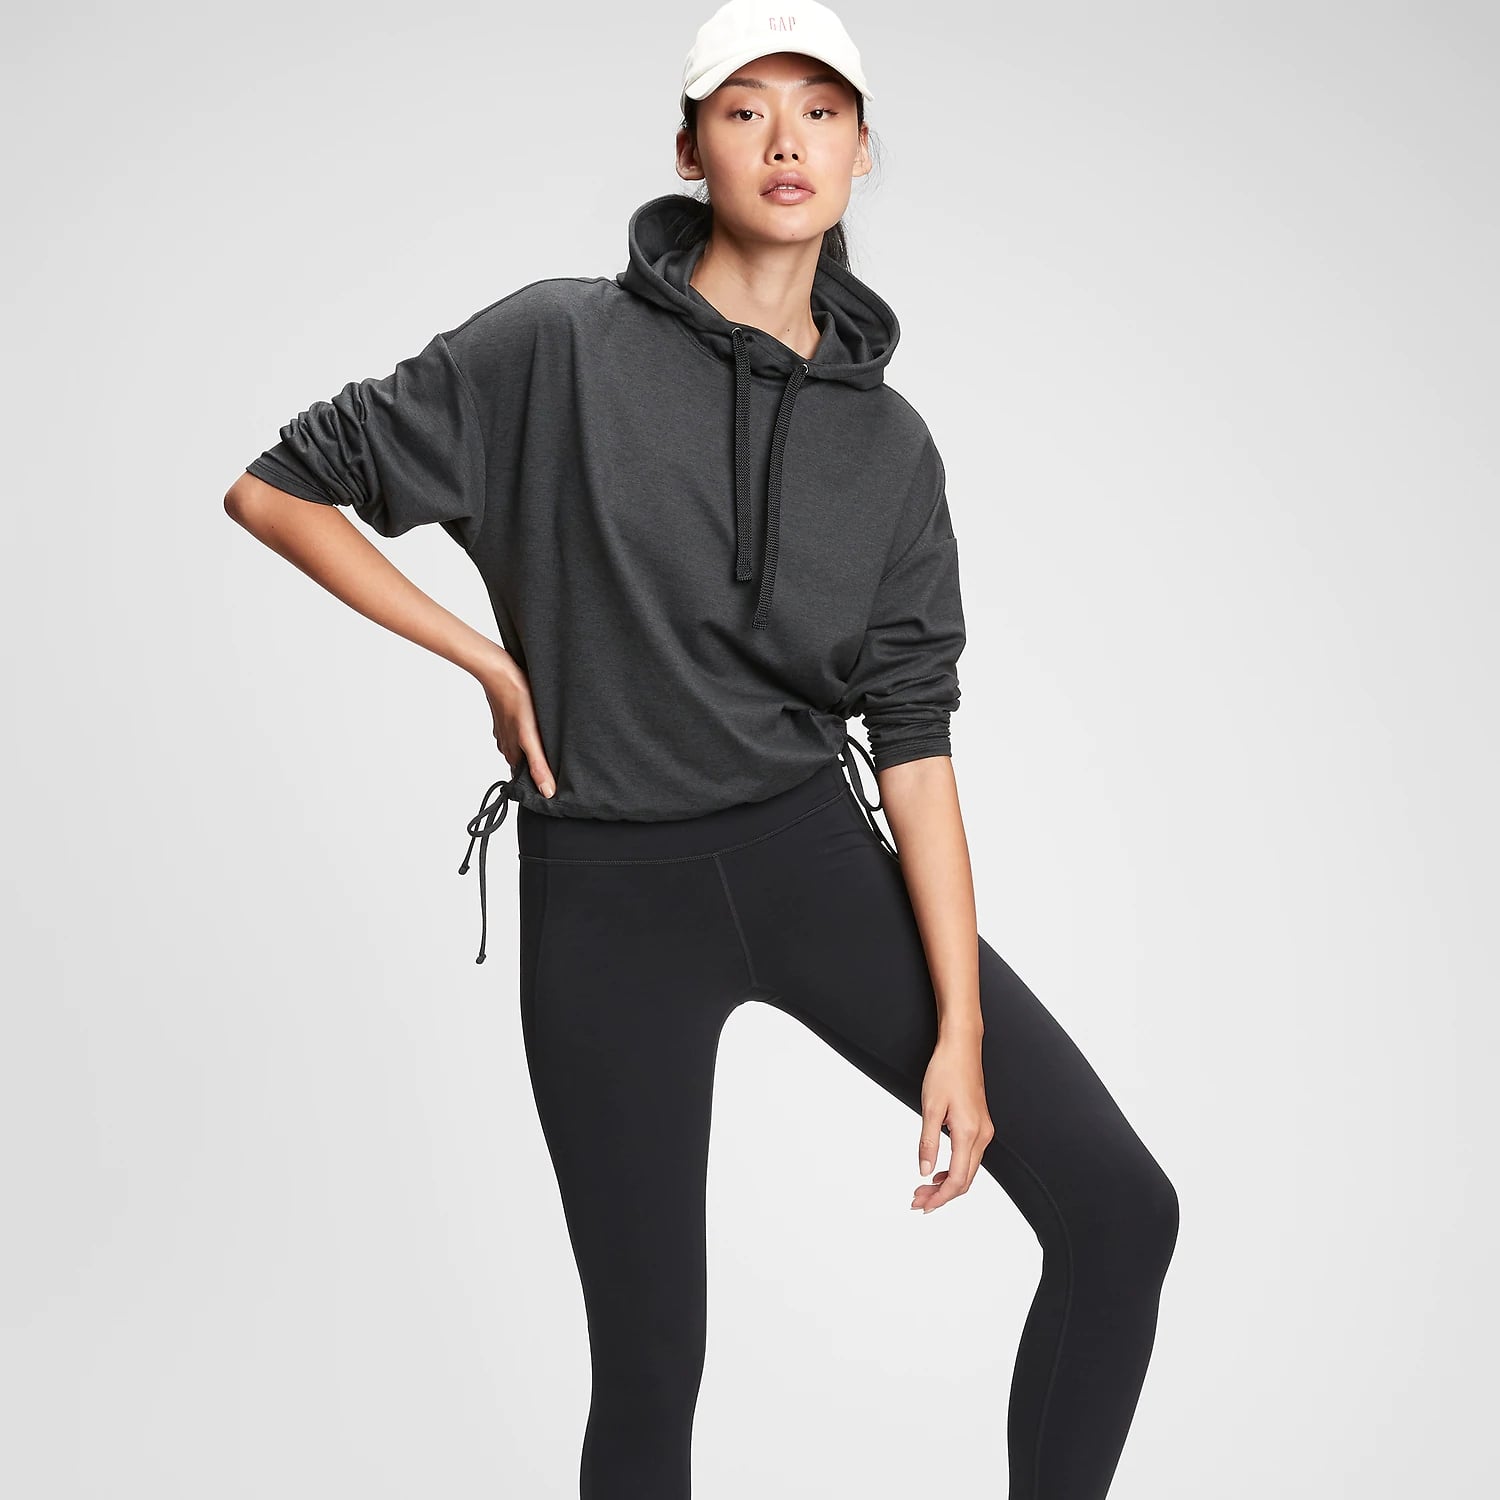 The Gap Workout Clothes | vlr.eng.br